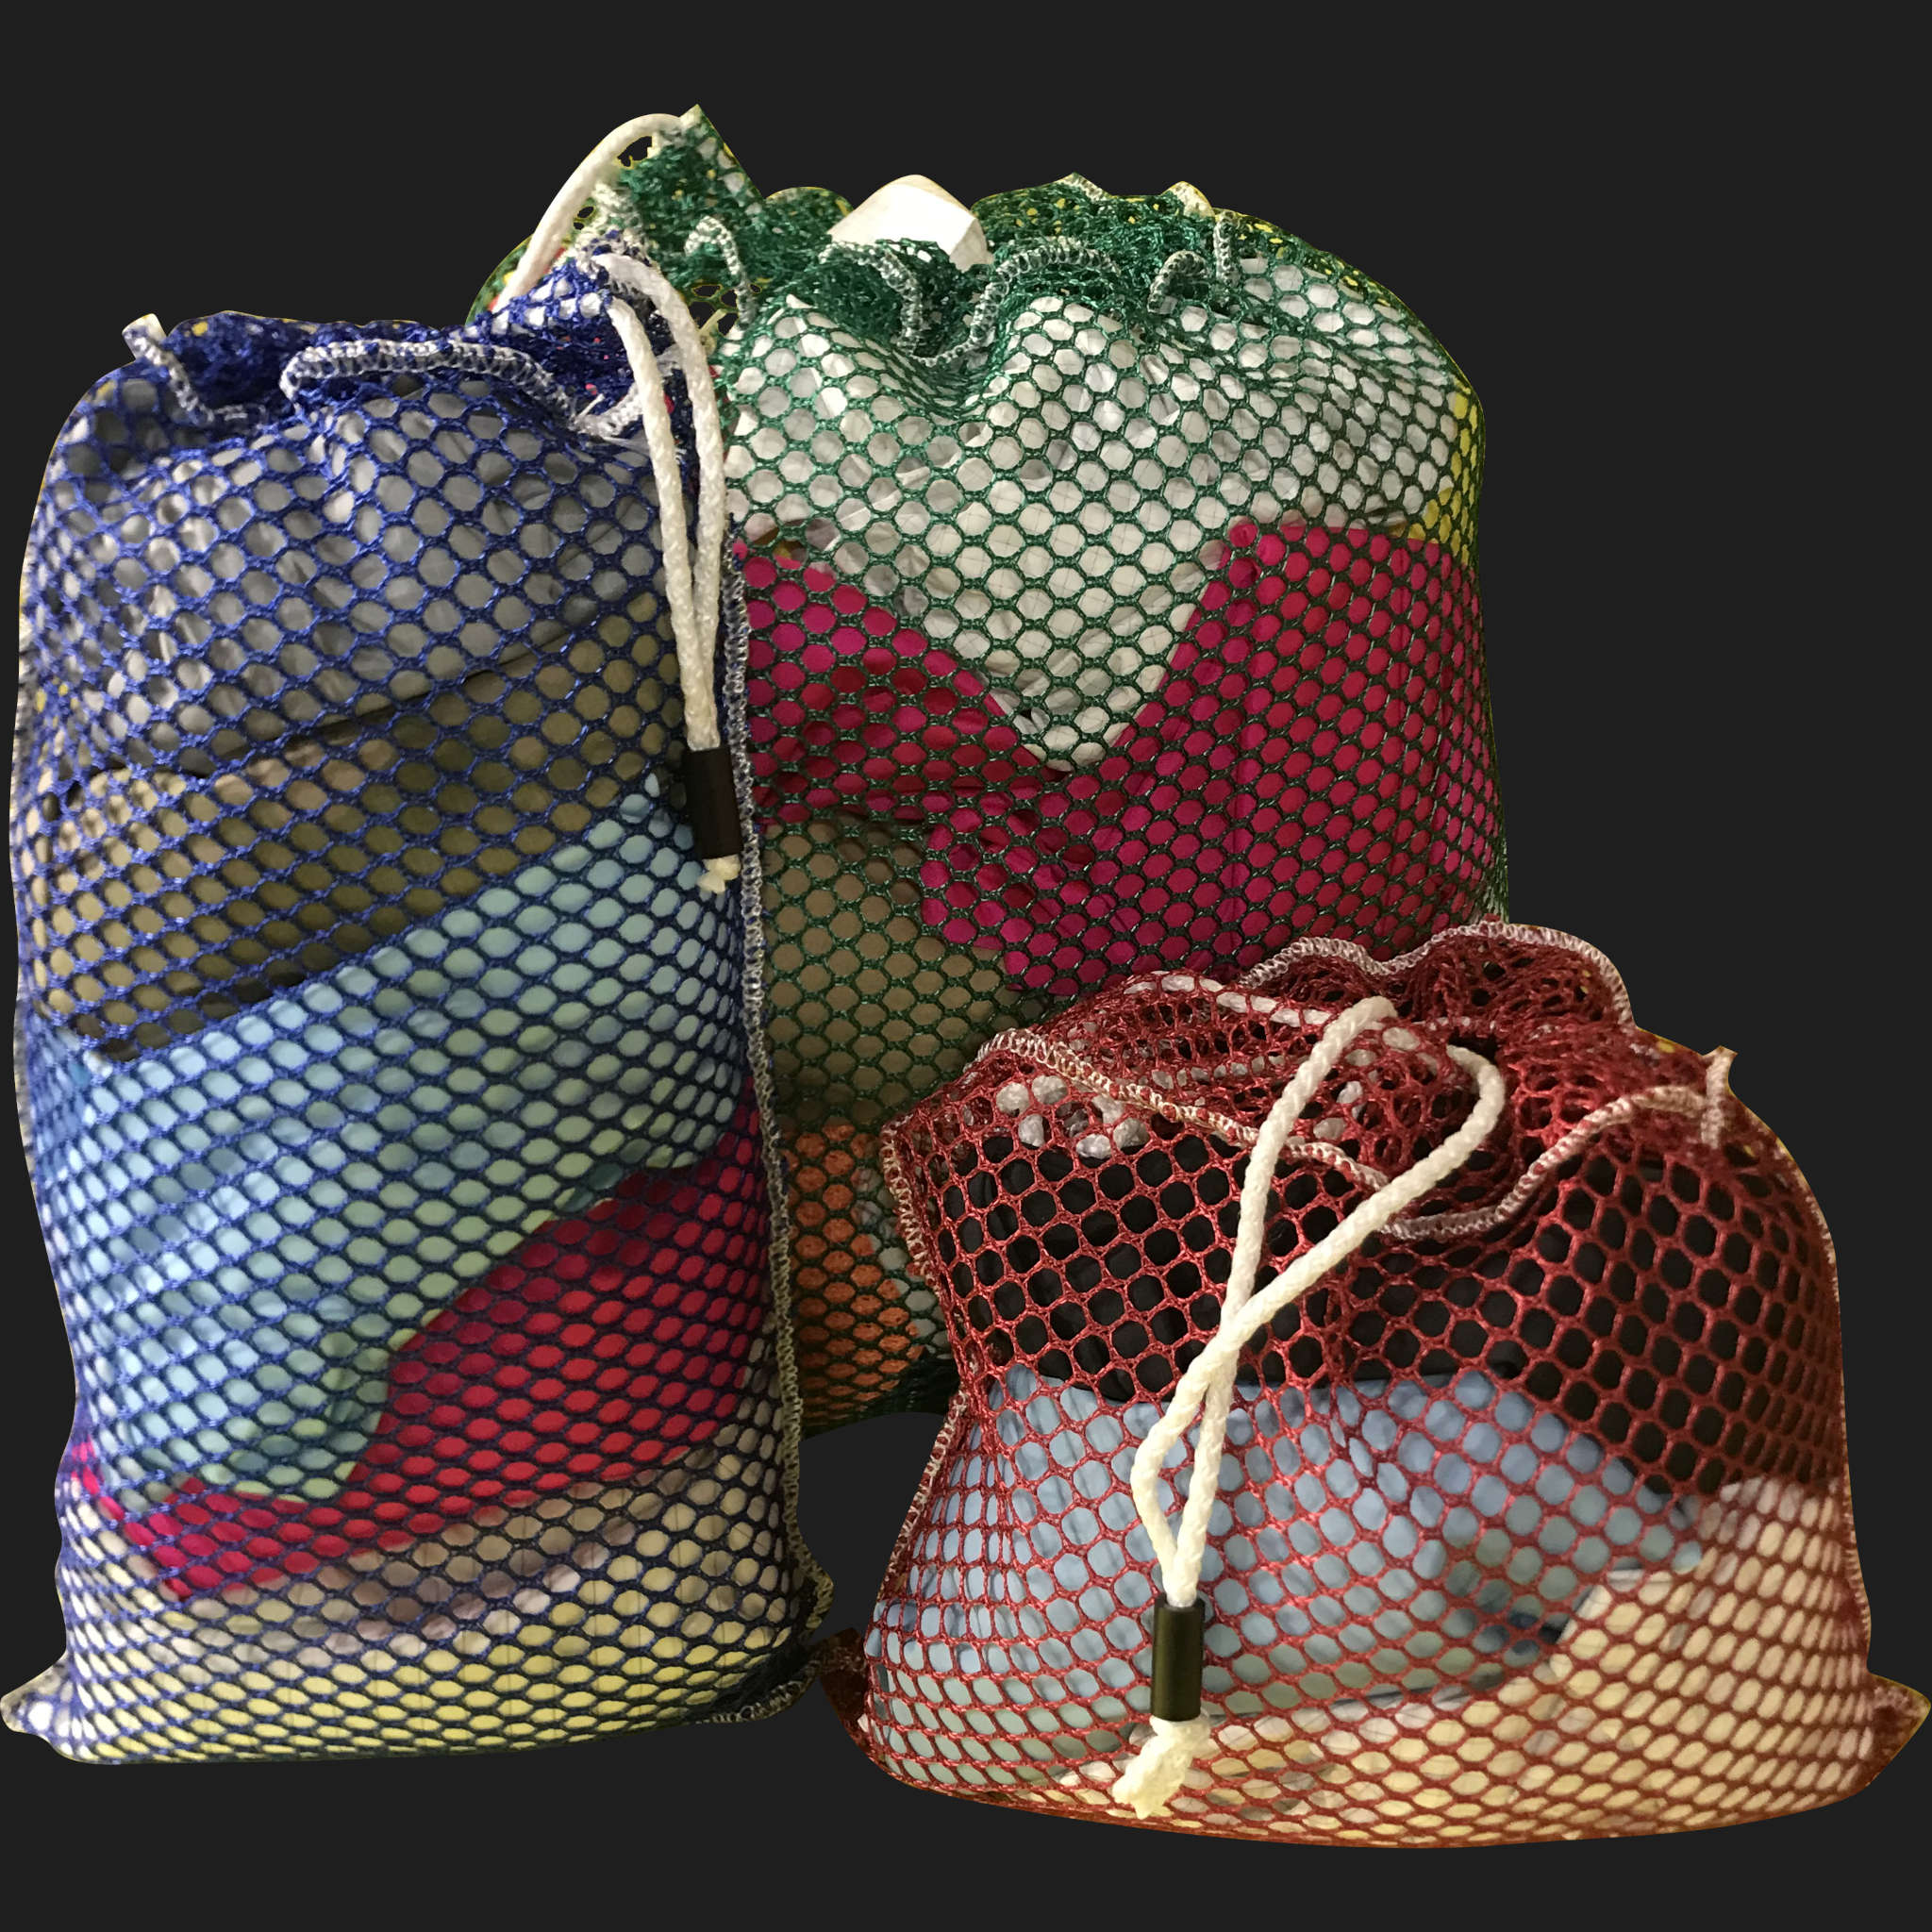 20" x 34" Customized Mesh-Net-Laundry Bags Heavy Duty with Cord and barrellock closure